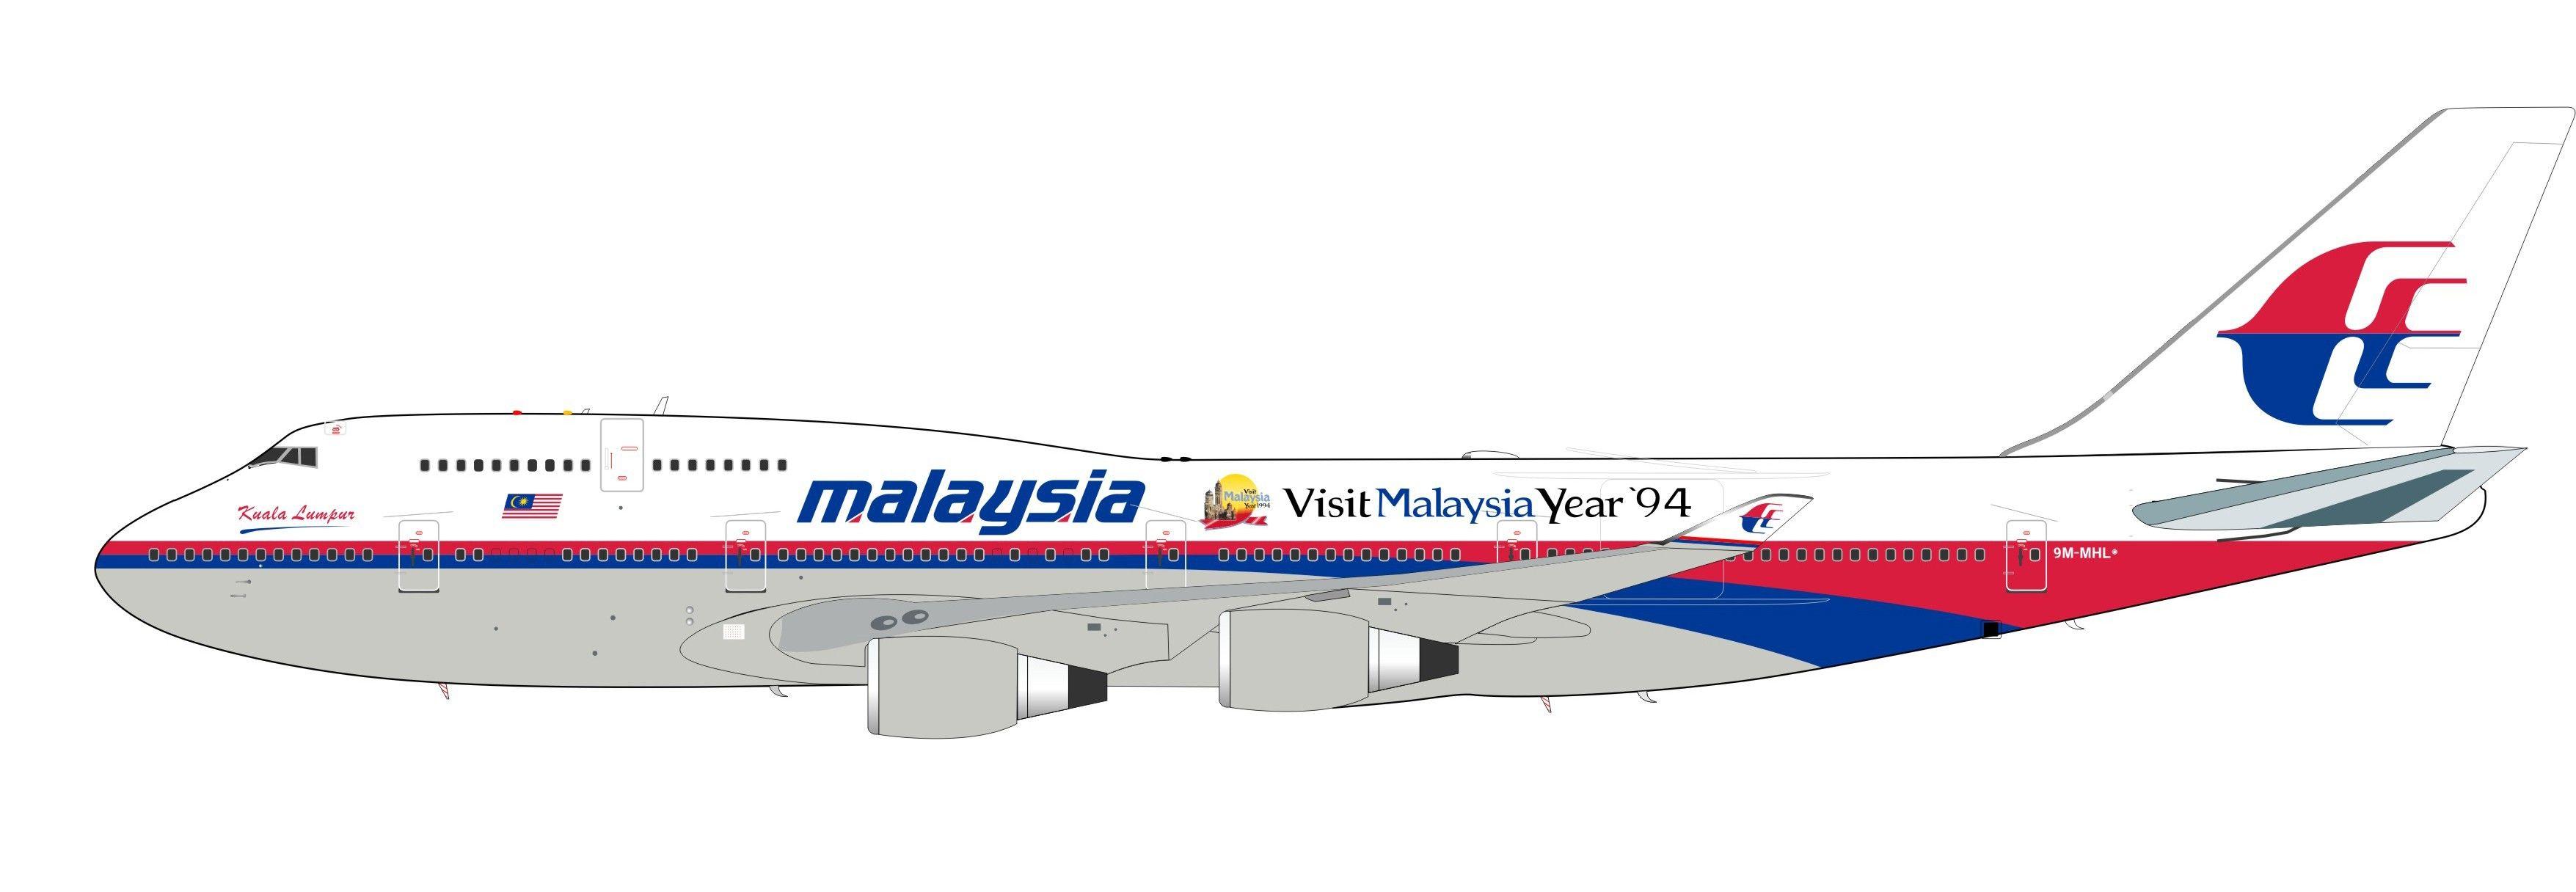 Malaysia Airlines Logo - Malaysia Airlines Boeing 747-4H6 94 Logo Reg# 9M-MHL w/ Stand JFOX ...